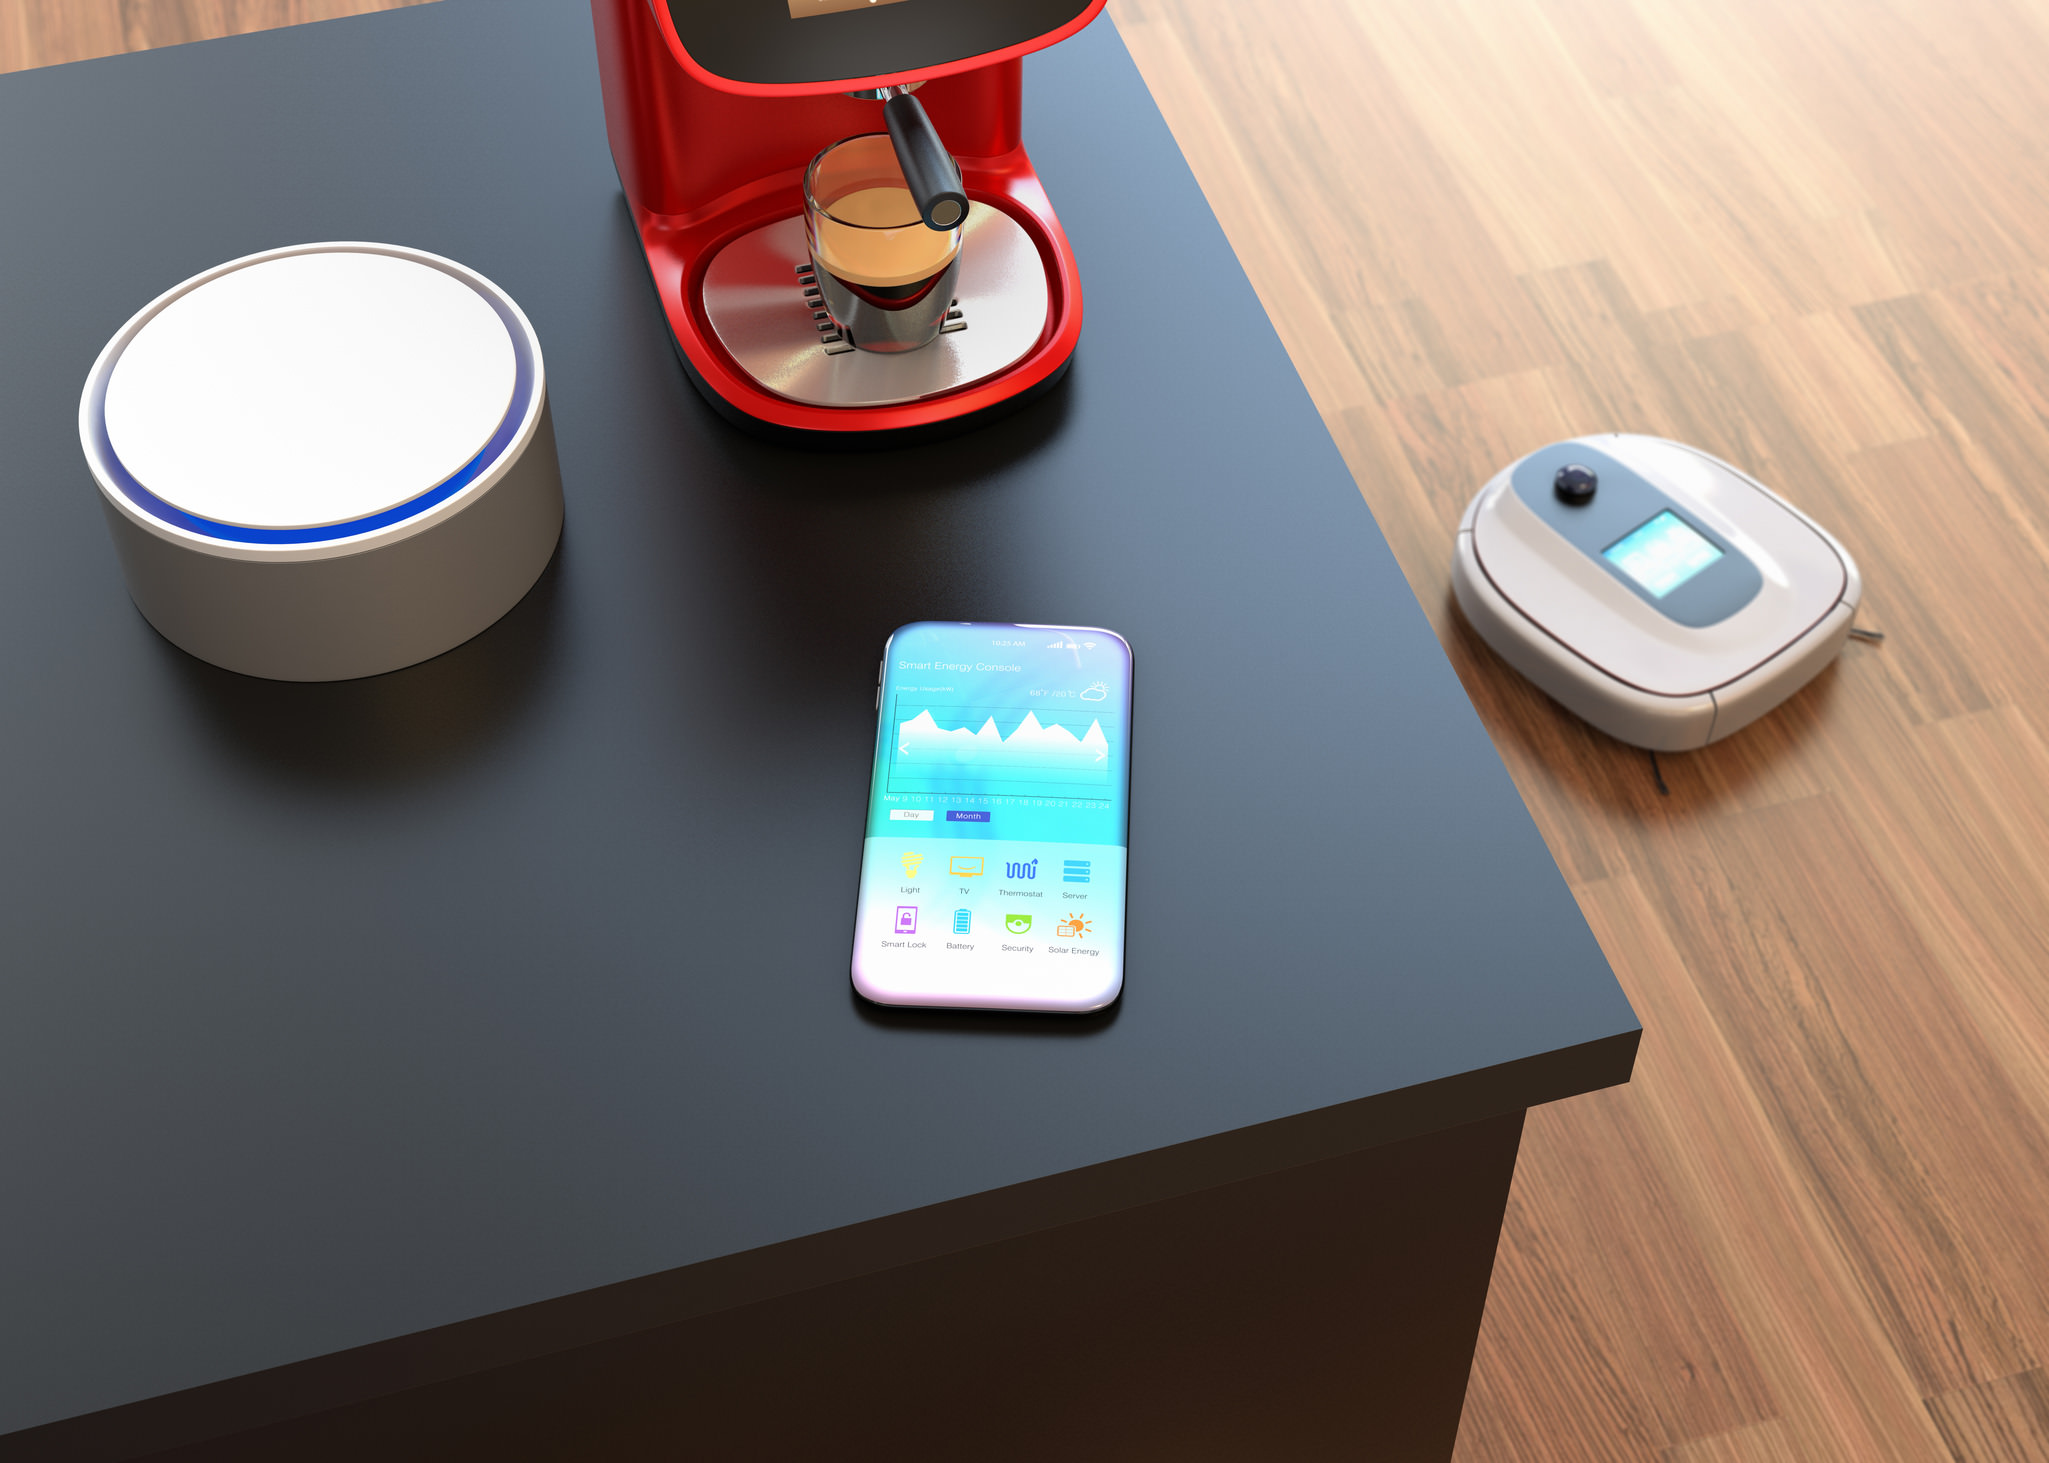 Internet of thing at home, coffee machine controlled by mobile phone